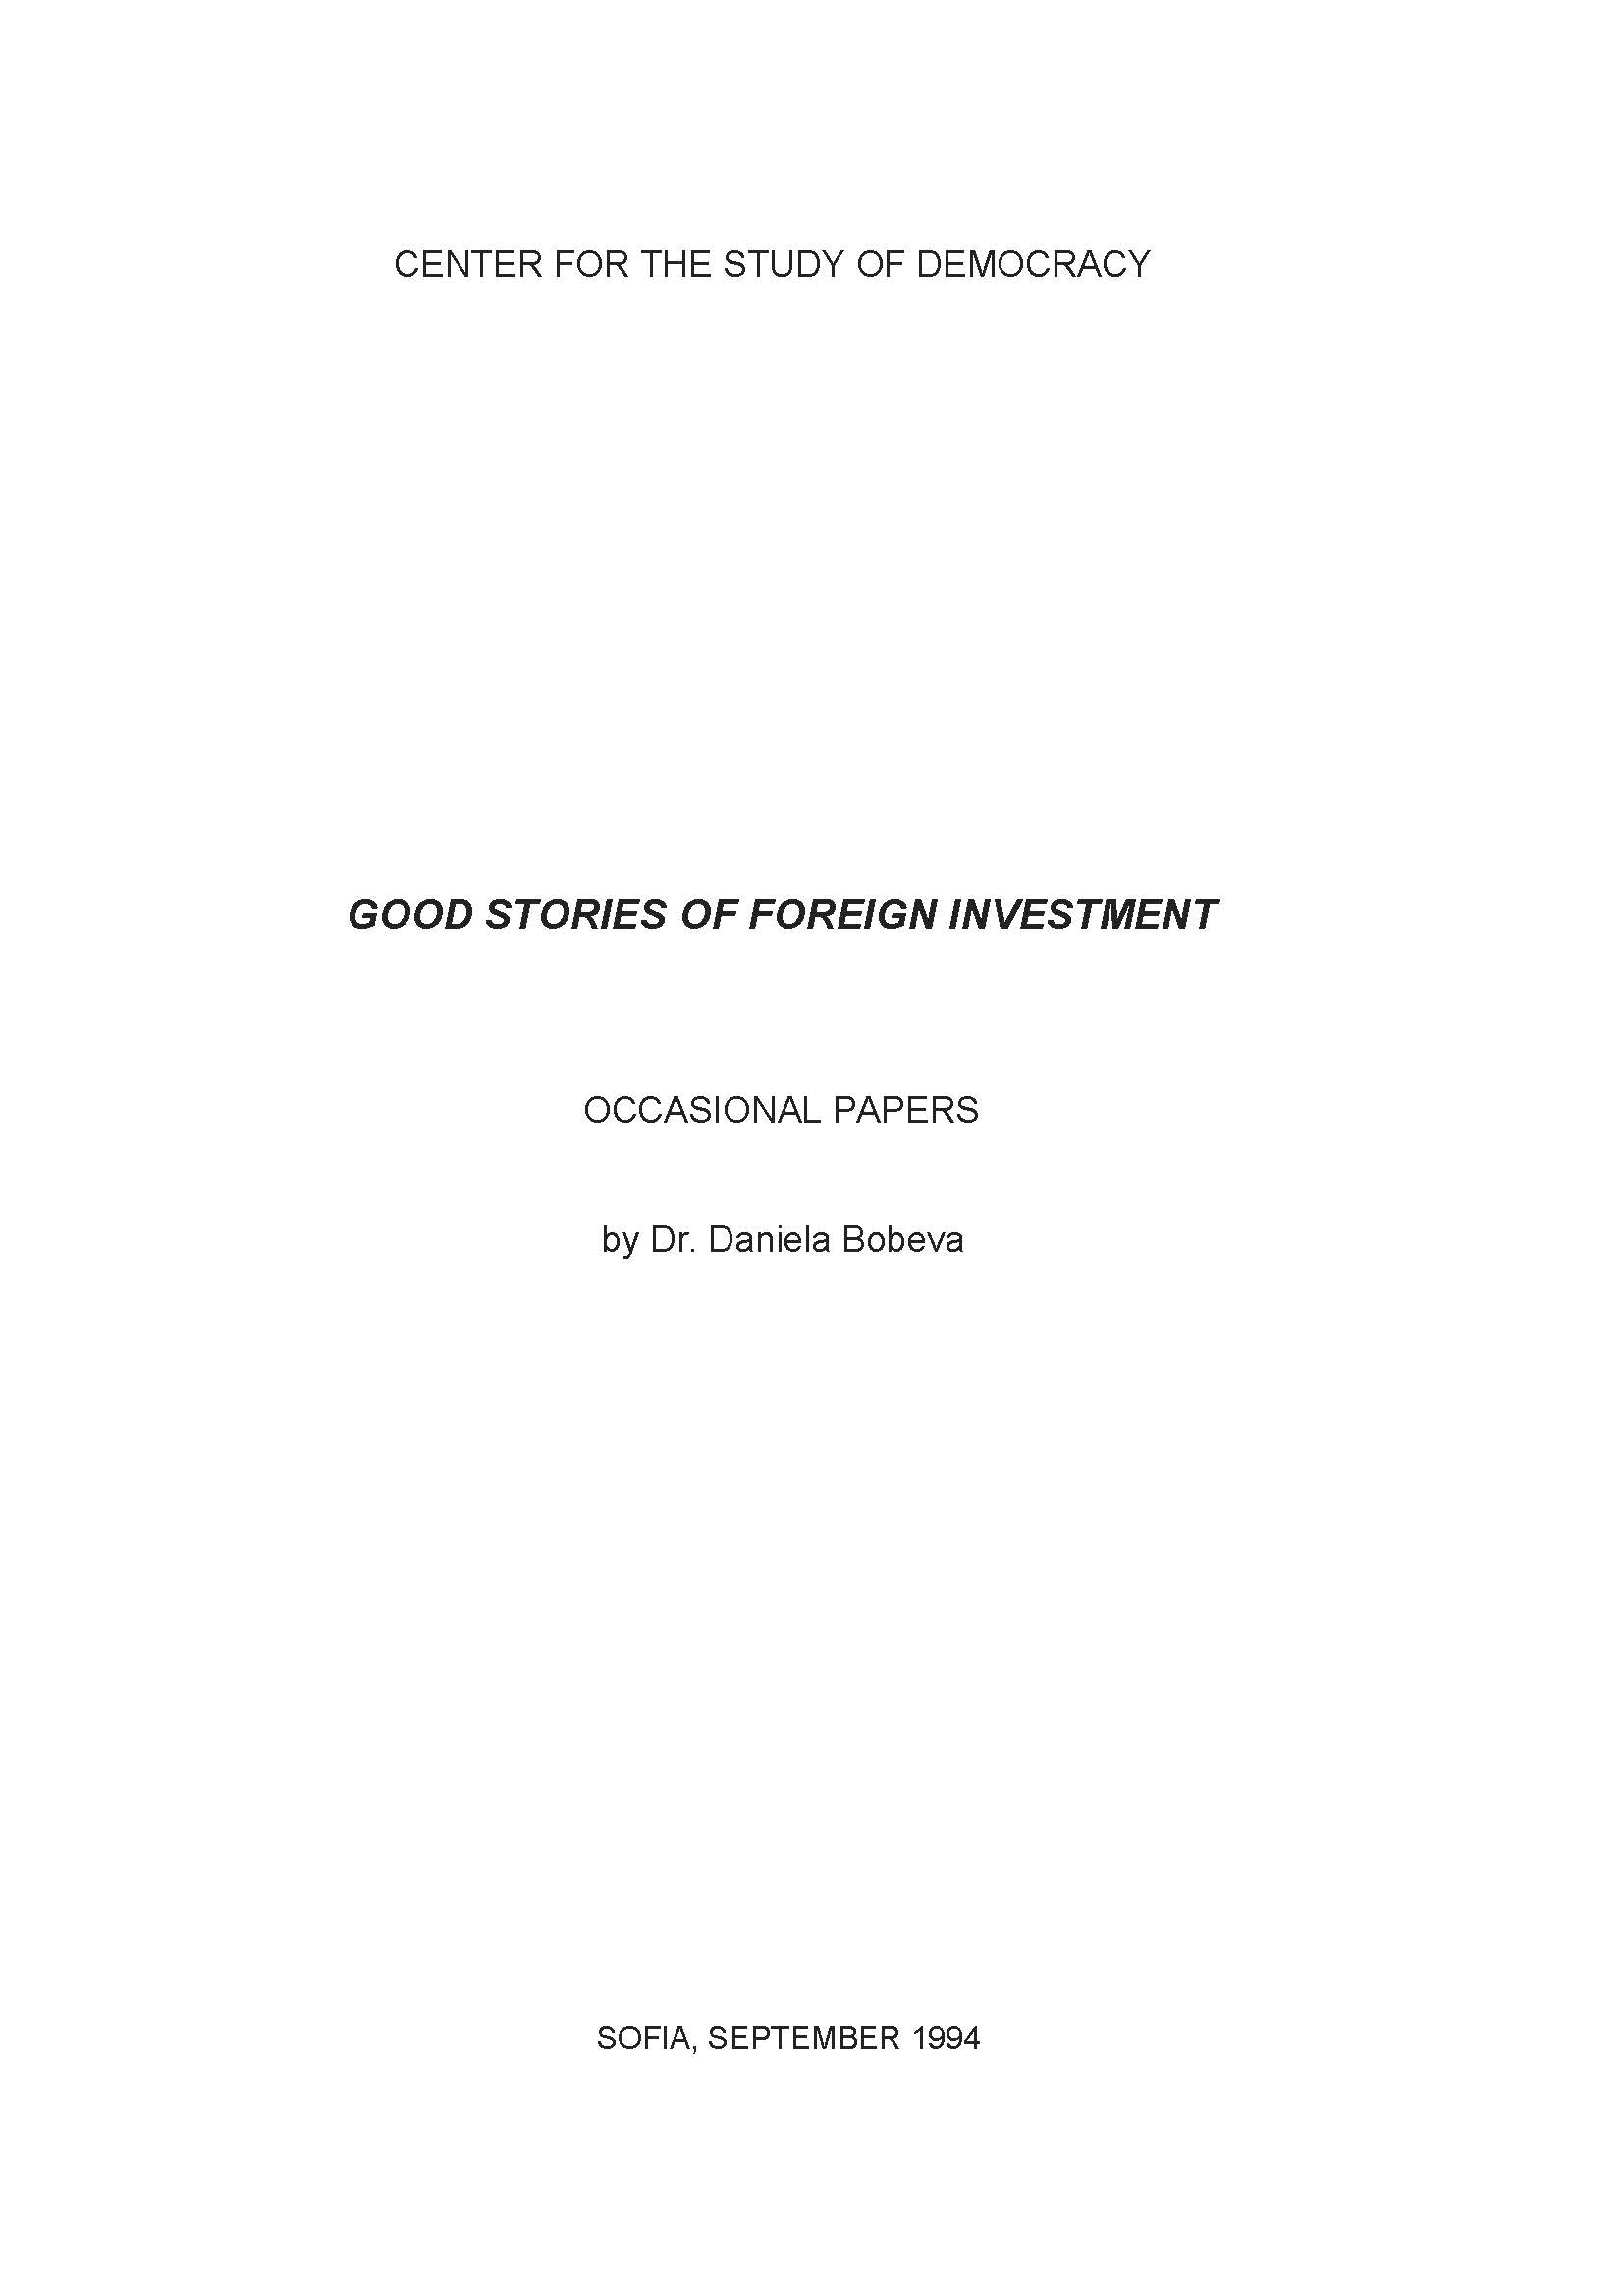 Good Stories of Foreign Investment